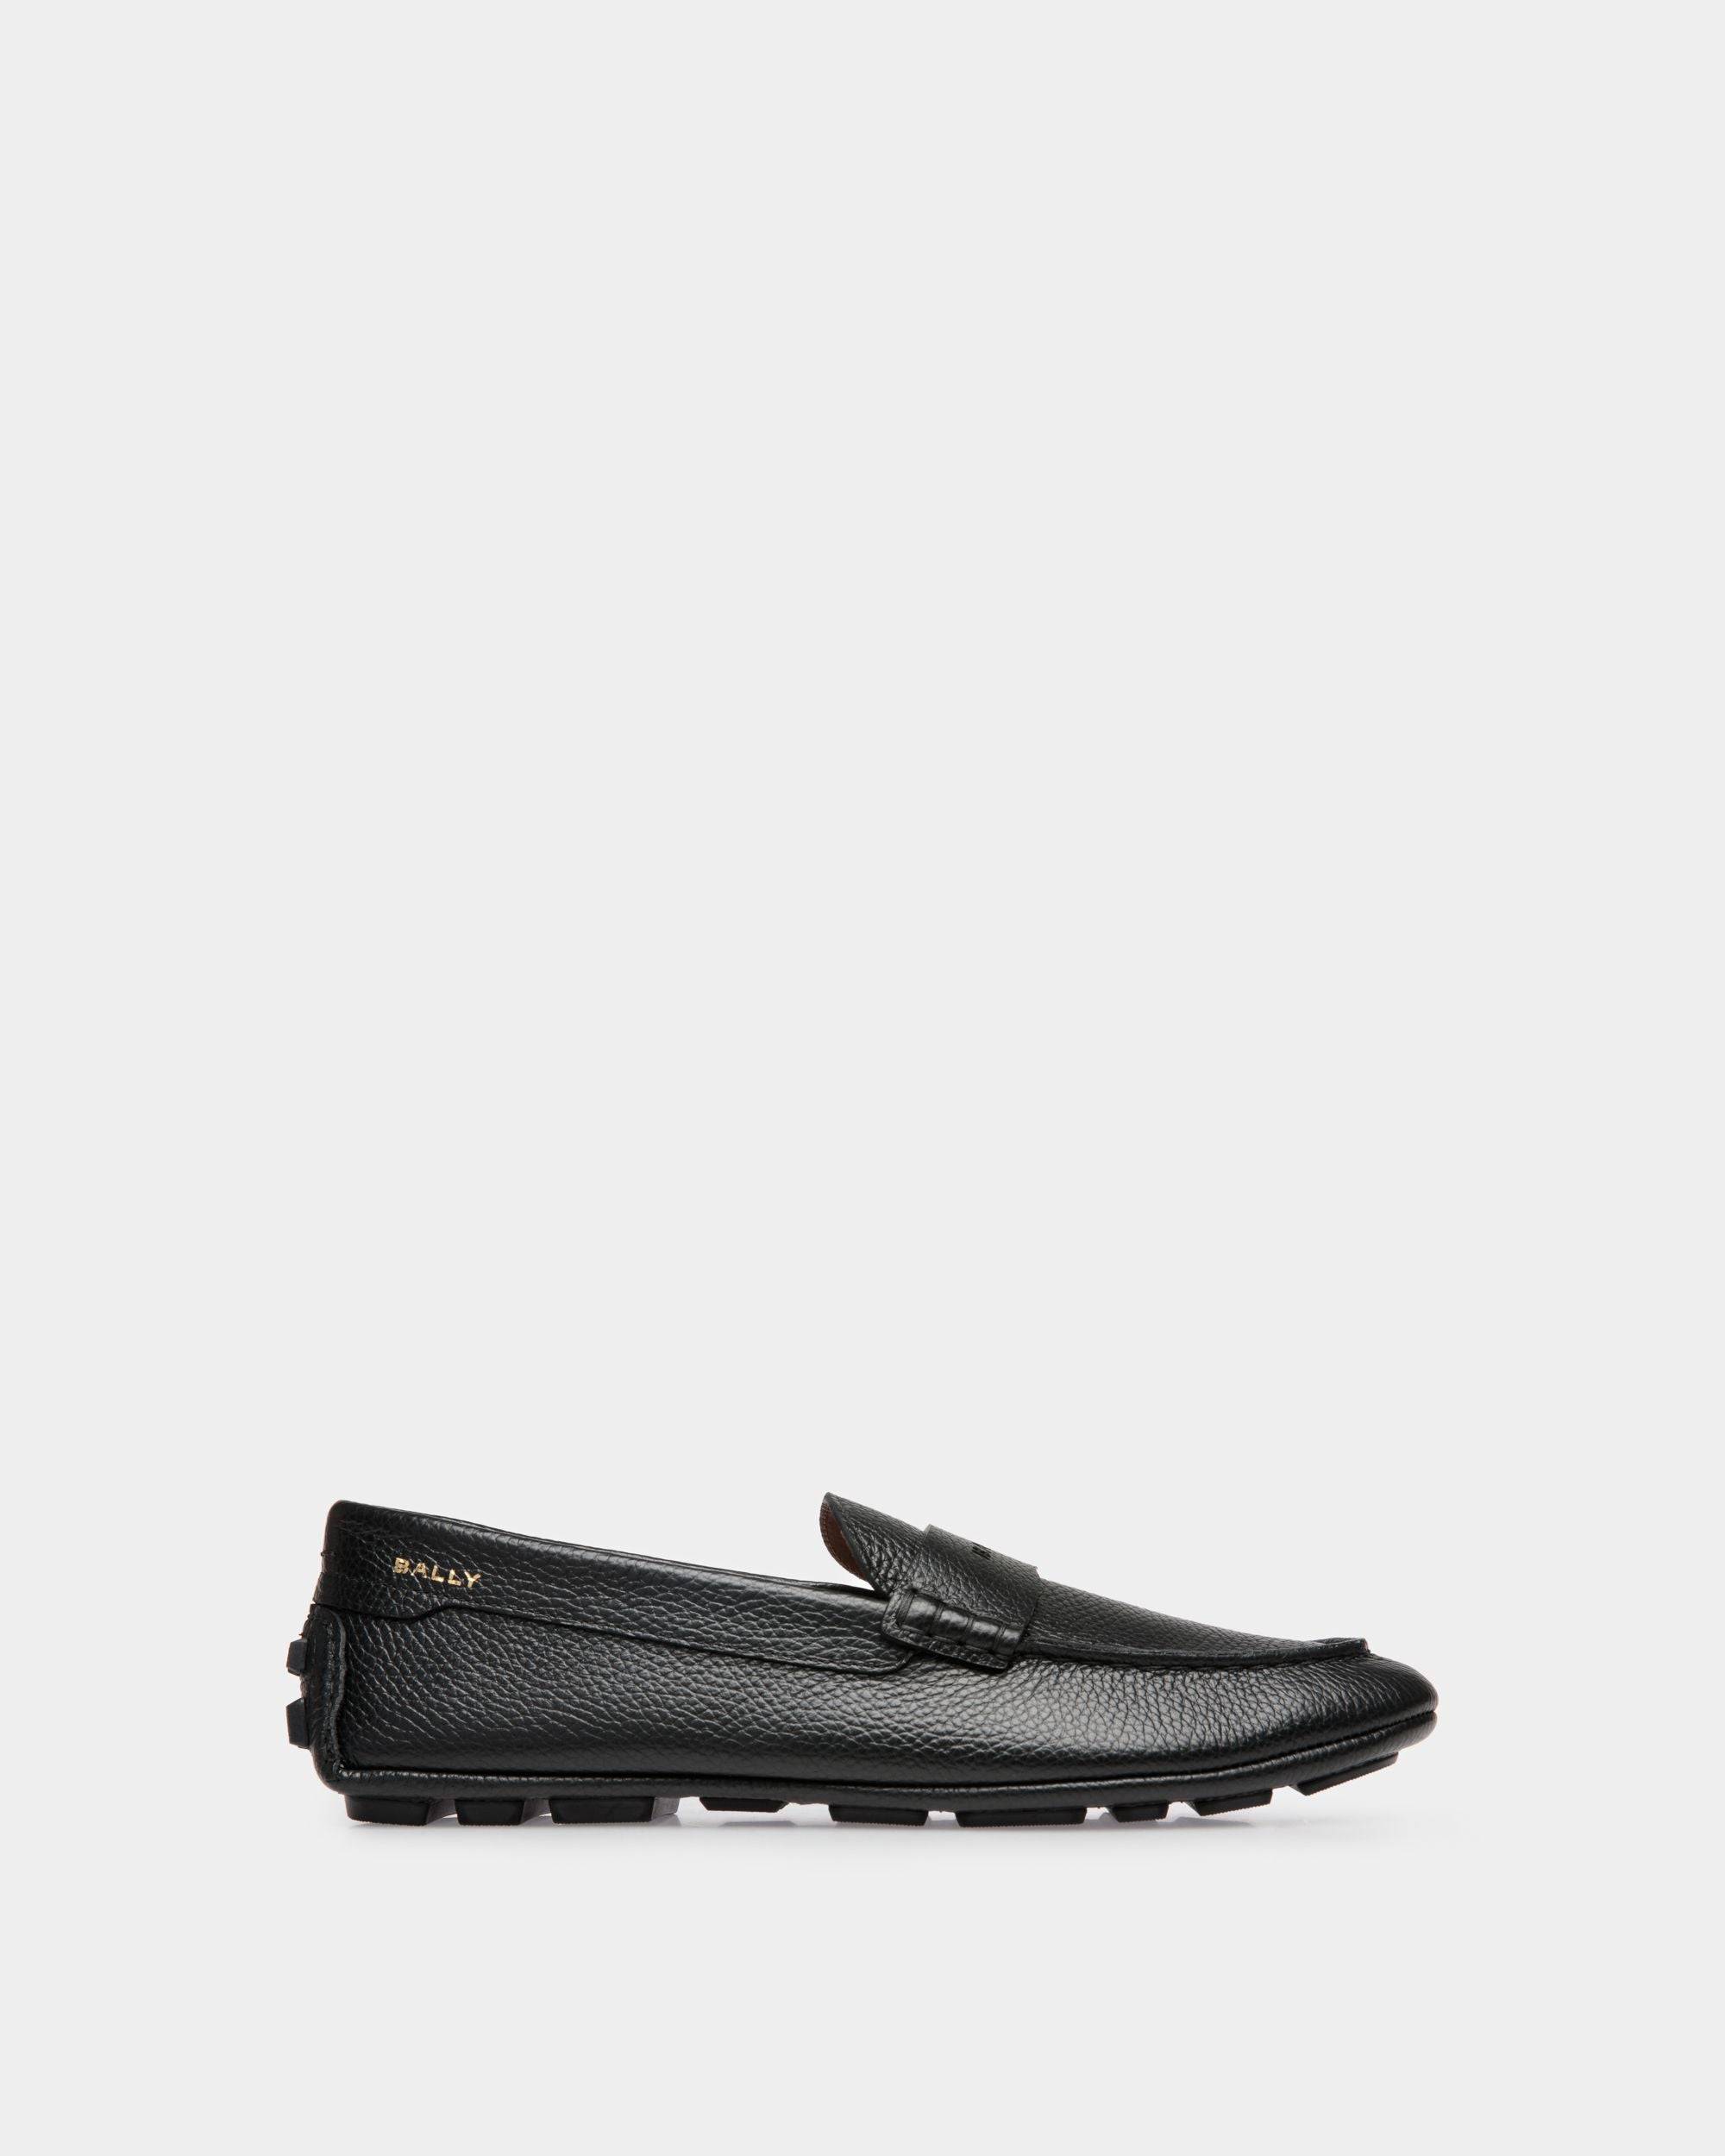 Men's Kerbs Driver in Black Grained Leather | Bally | Still Life Side